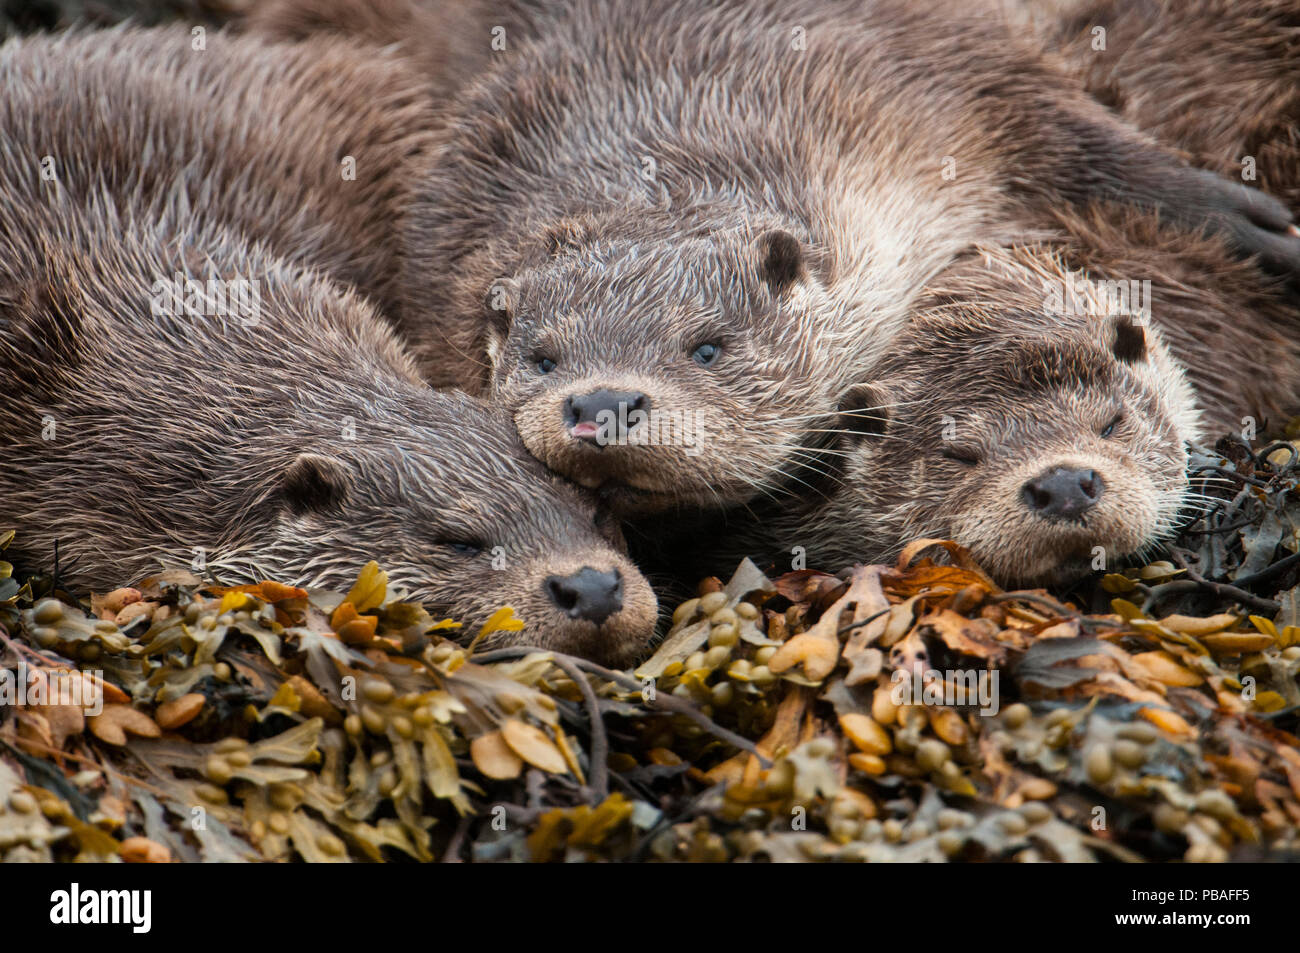 A family of otters rest on the intertidal seaweed. European river otter (Lutra lutra) Shetland, Scotland, UK, July. Stock Photo